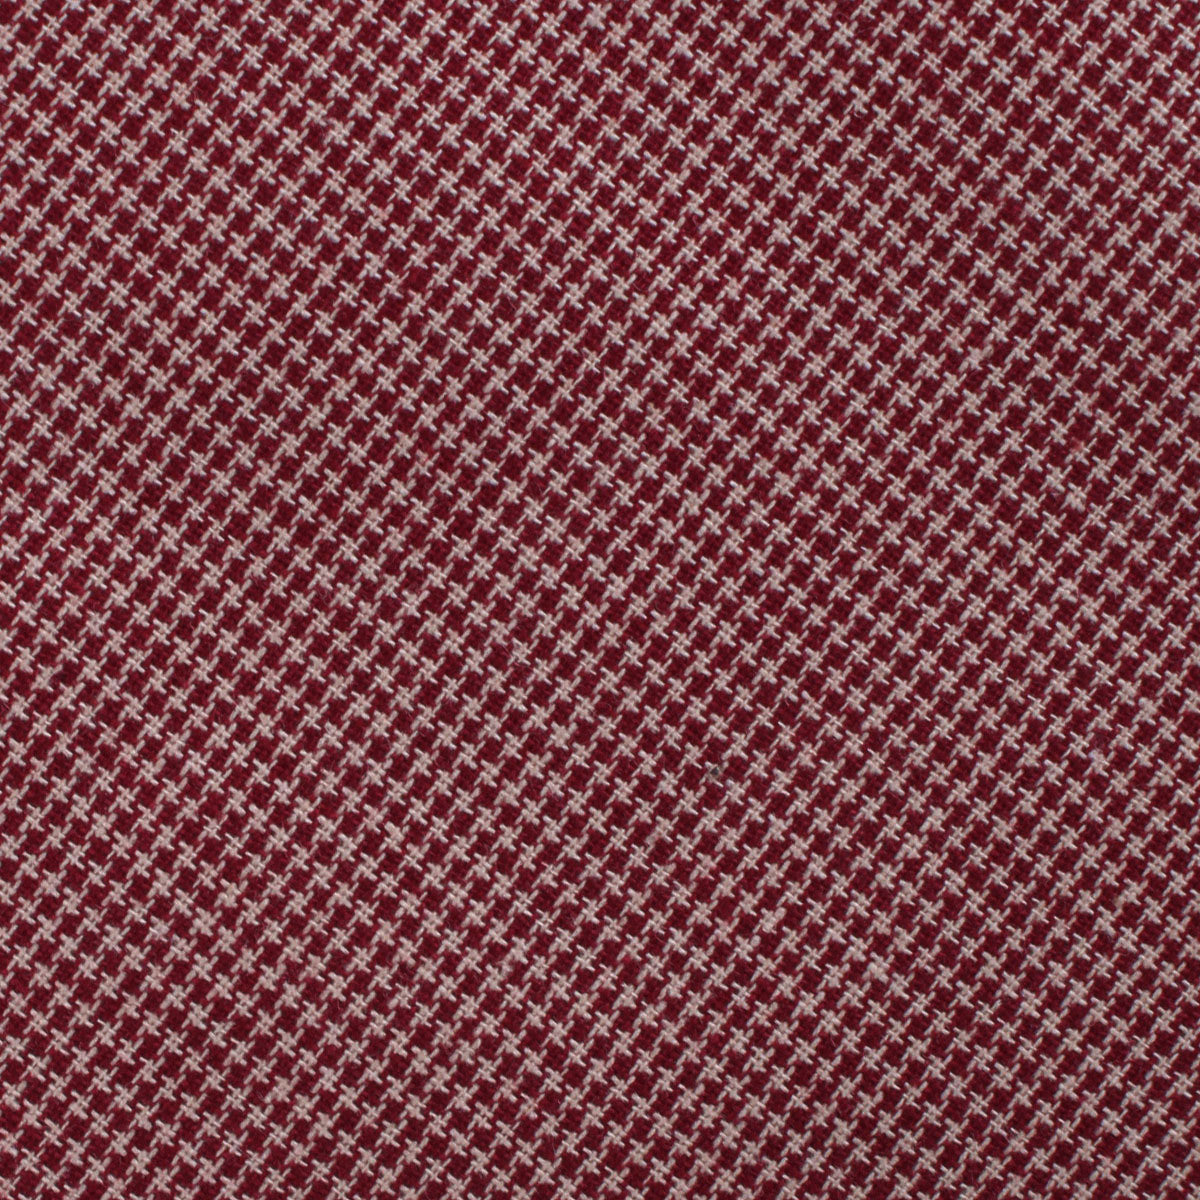 Khaki Red Houndstooth Blend Fabric Self Bowtie